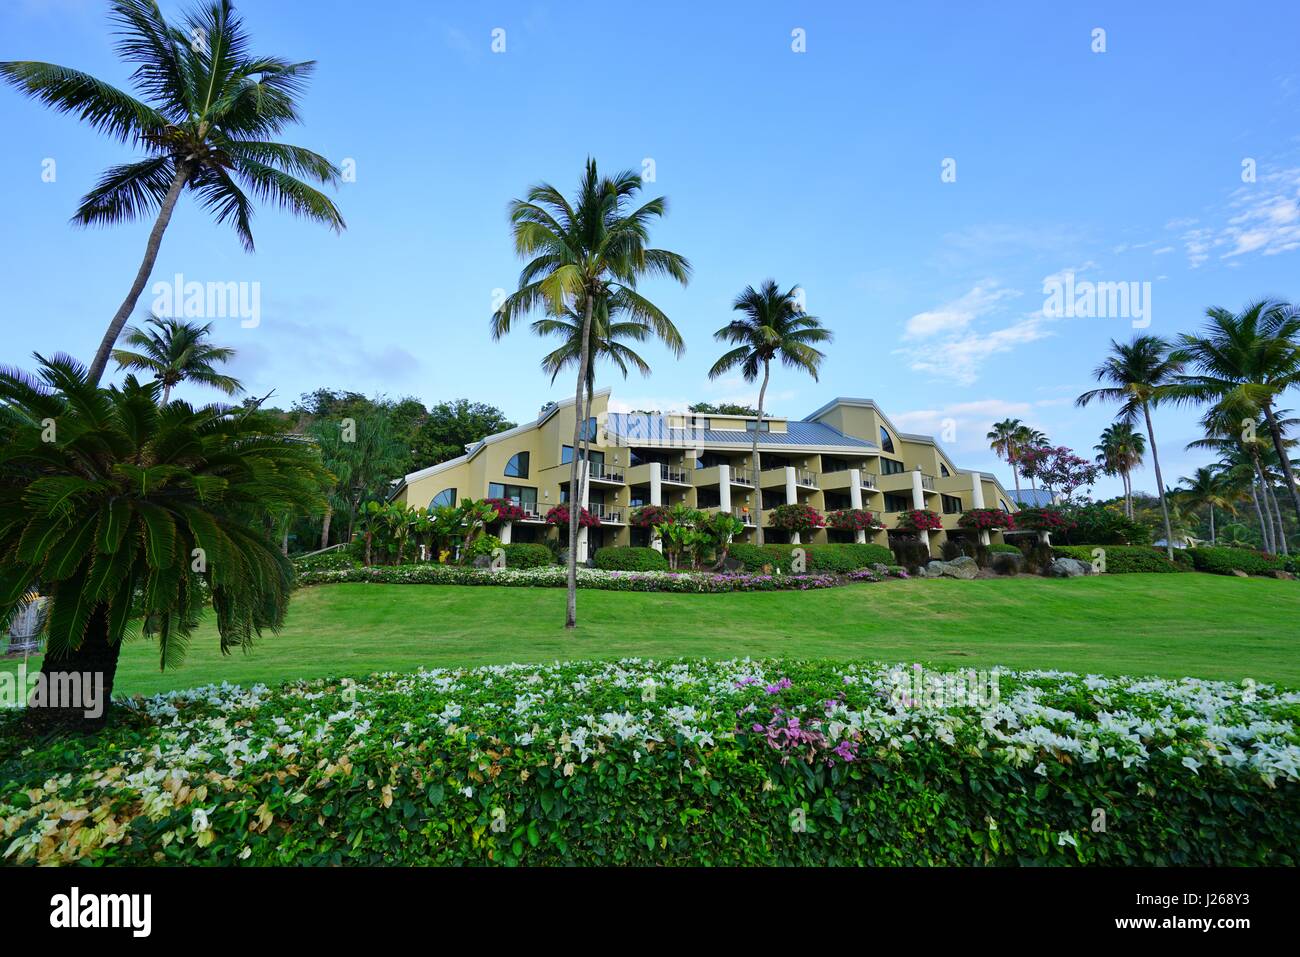 View of the Westin St John Resort and Villas, a luxury resort hotel located on Great Cruz Bay in the United States Virgin Islands. Stock Photo